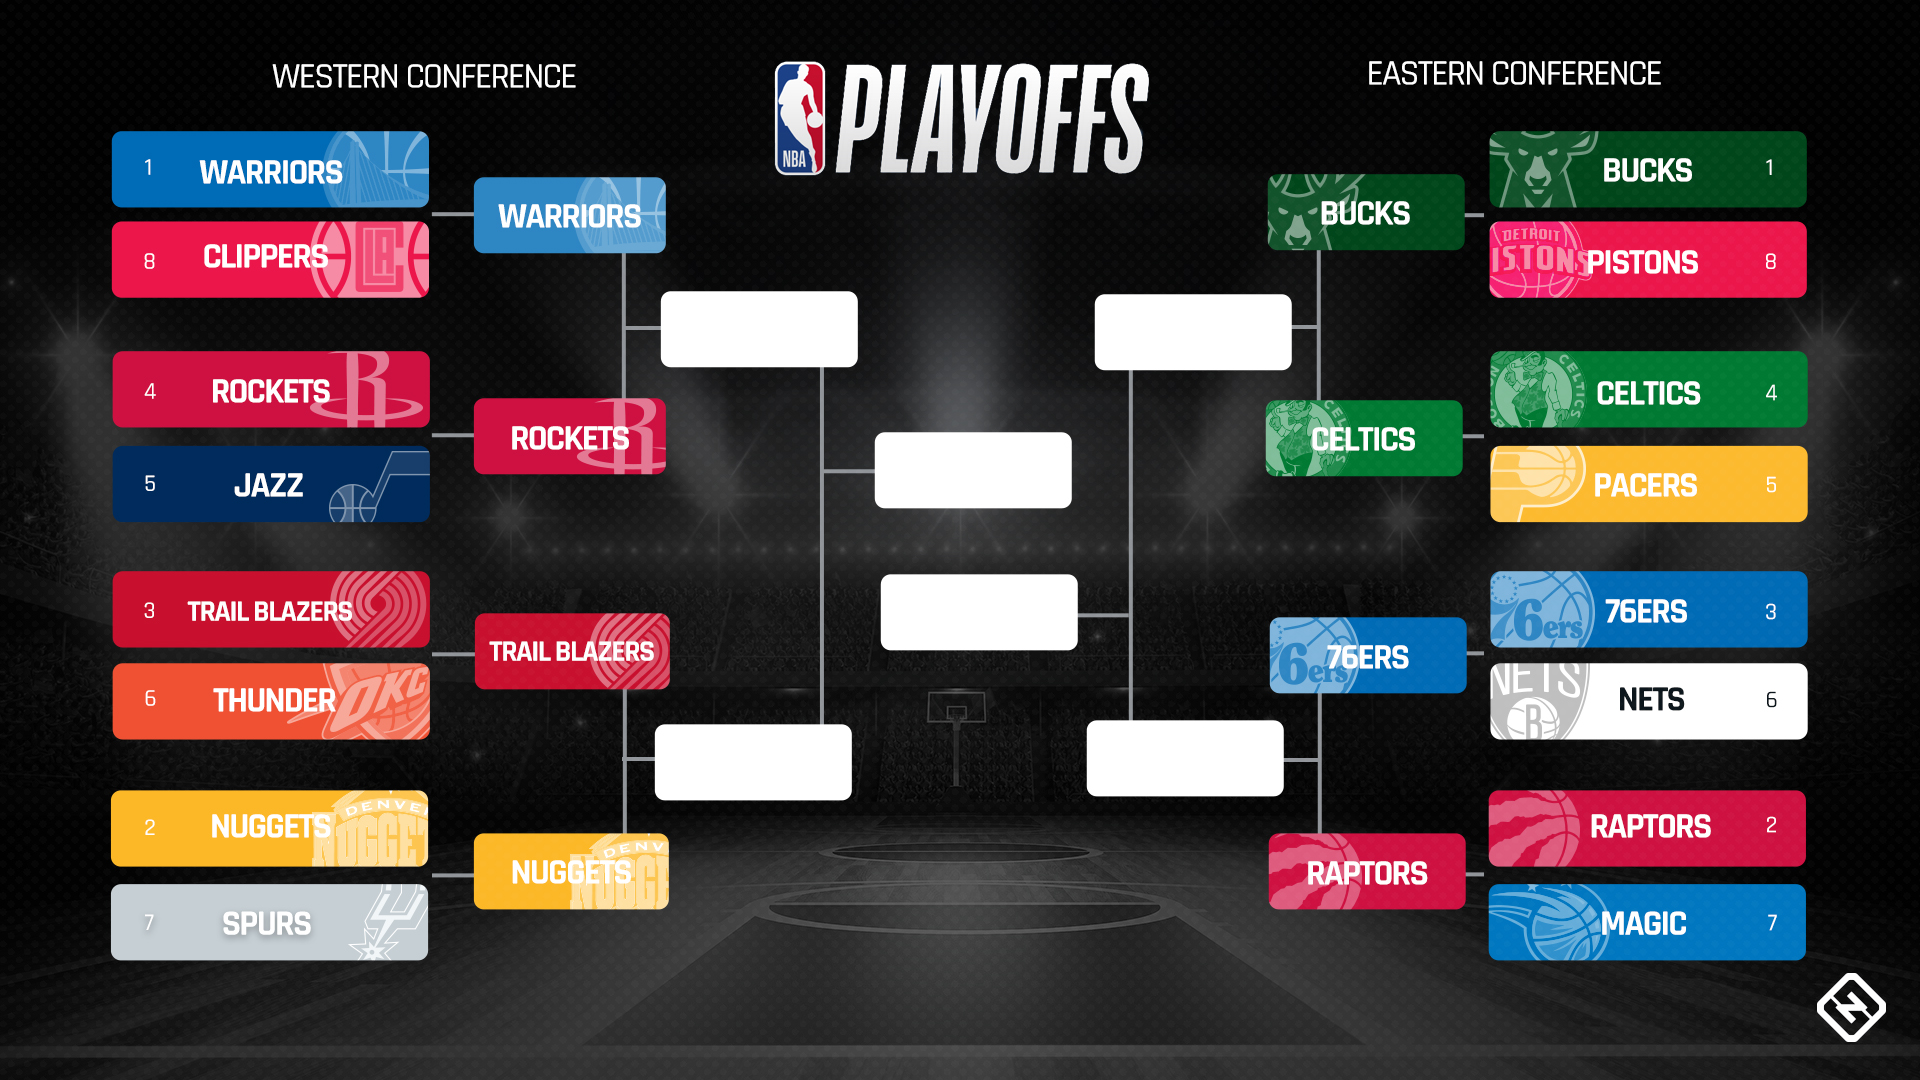 51 HQ Pictures 2020 Nba Playoff Bracket Results - NBA playoffs today 2019: Live scores, TV schedule, updates ...